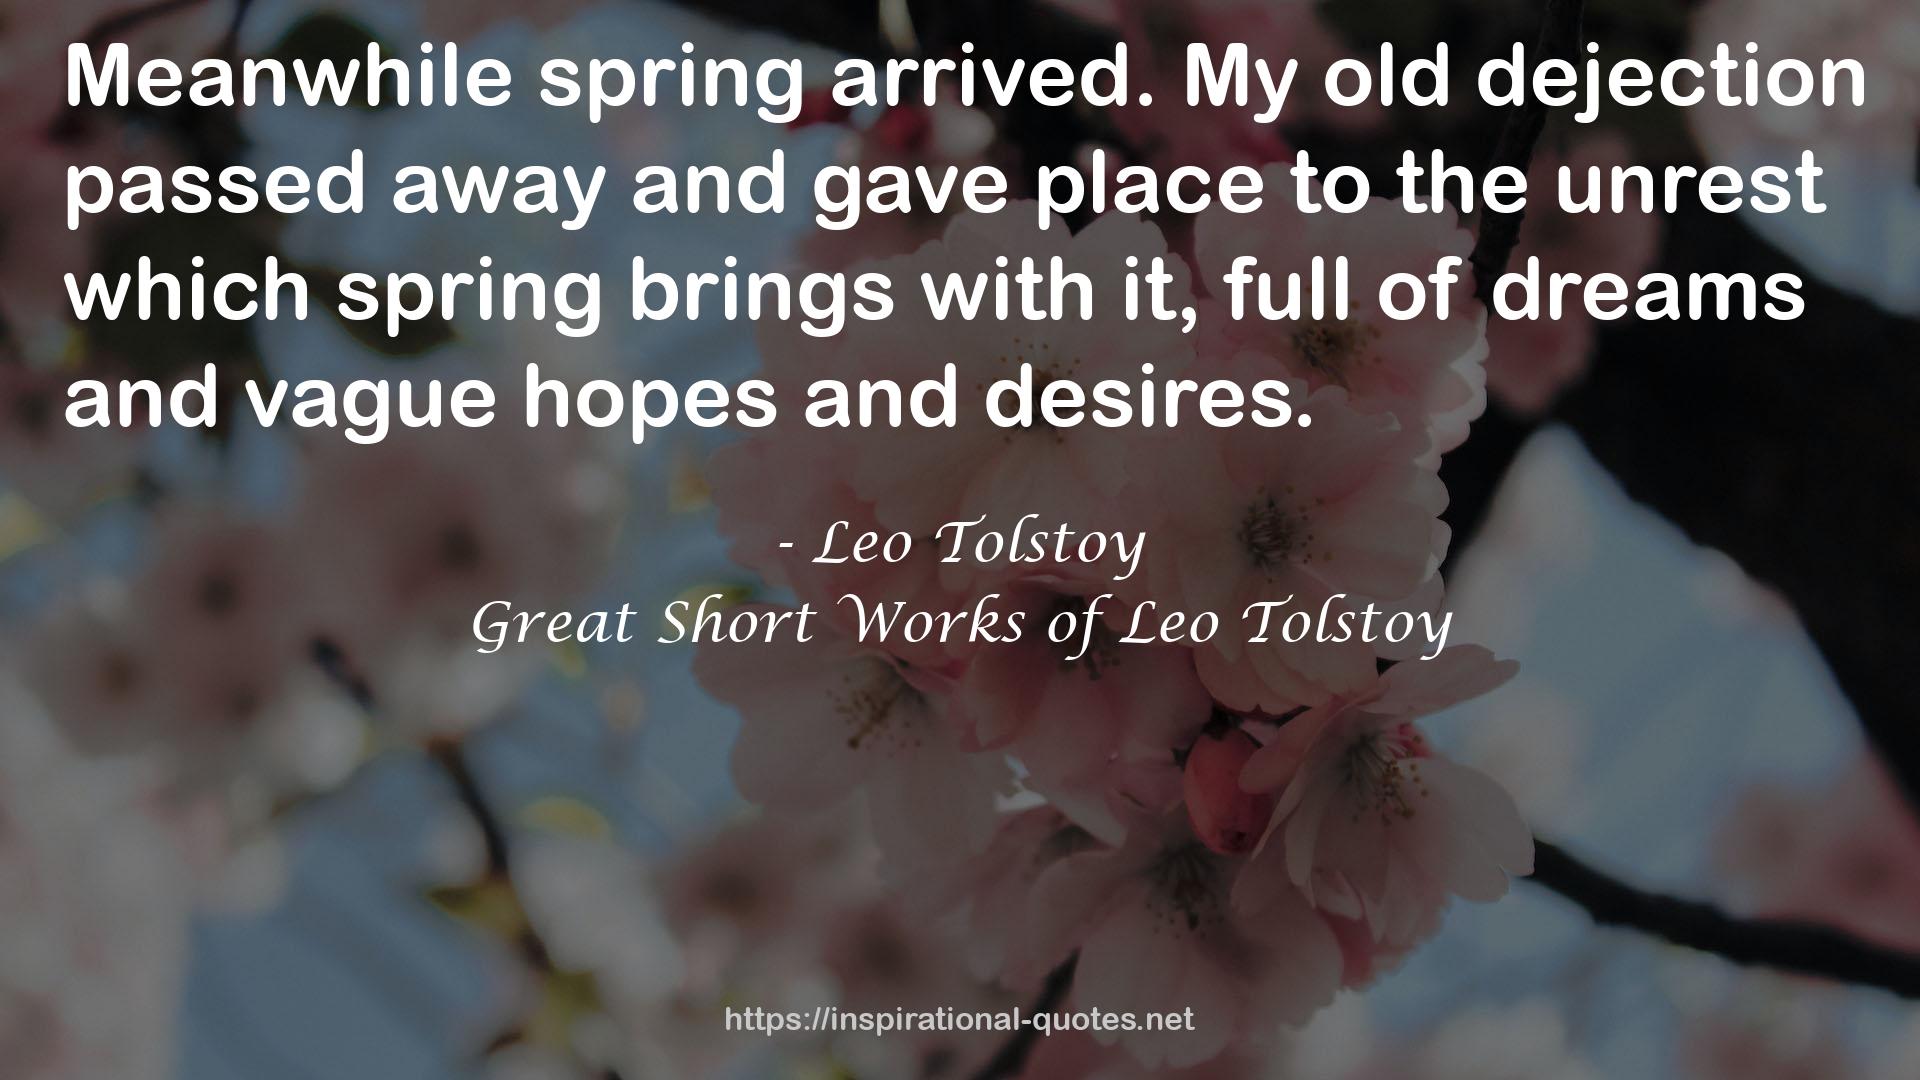 Great Short Works of Leo Tolstoy QUOTES